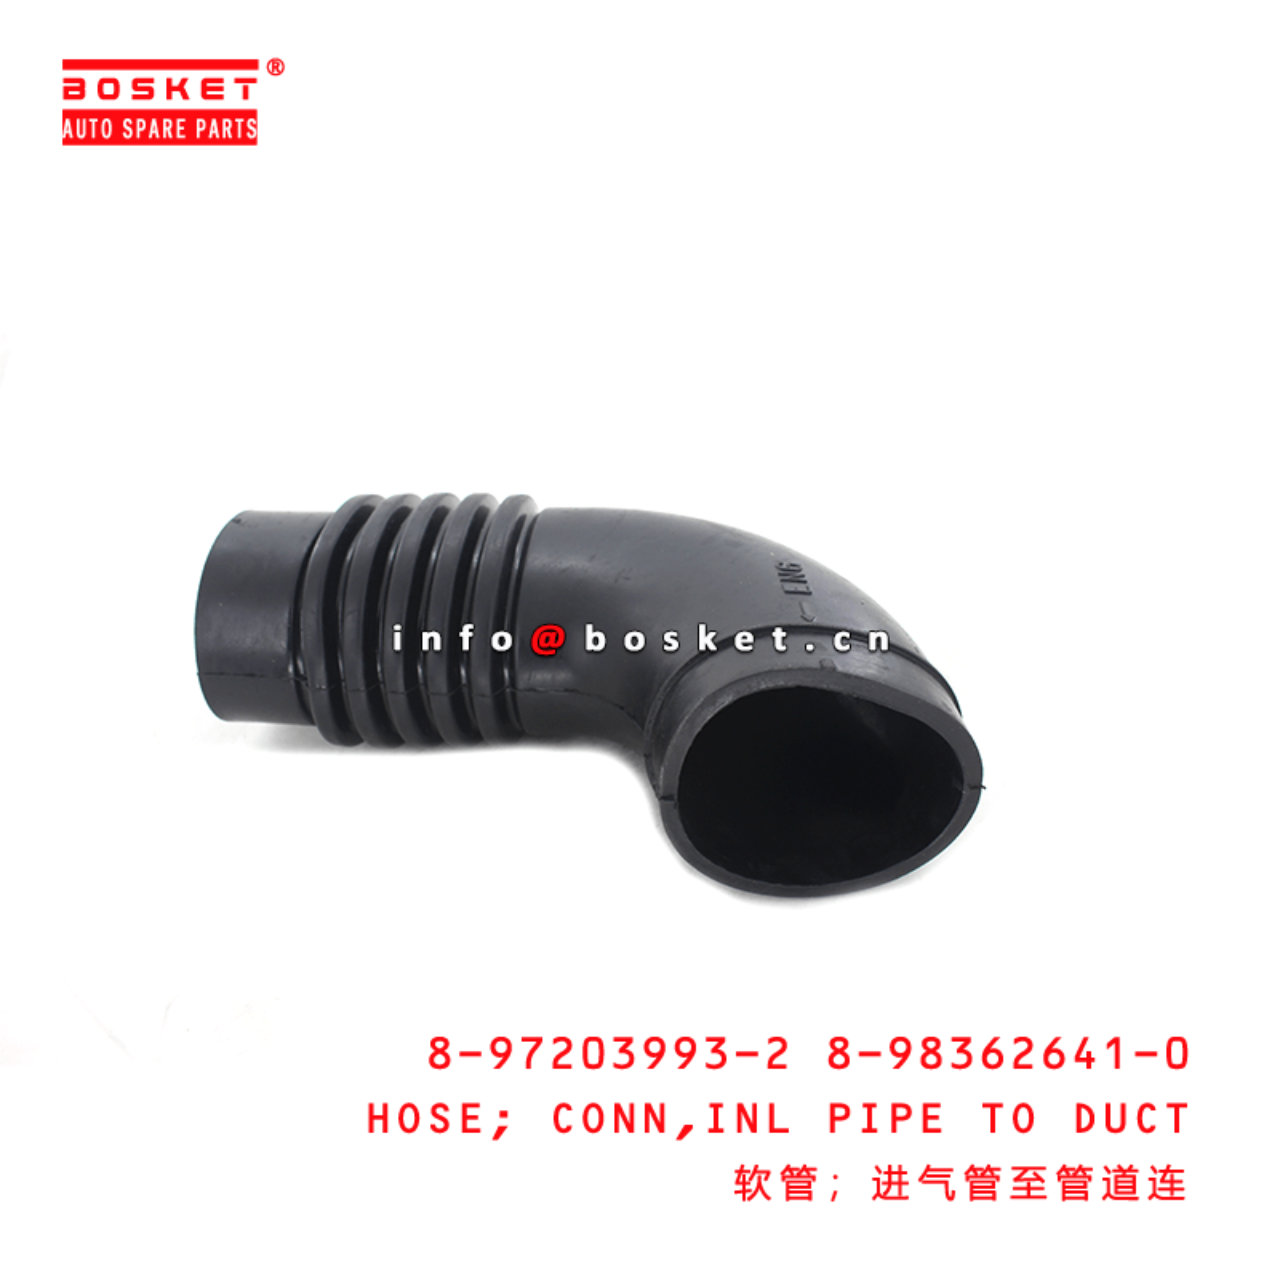 8-97203993-2 8-98362641-0 Inlet Pipe To Duct Connecting Rod Hose 8972039932 8983626410 Suitable for 